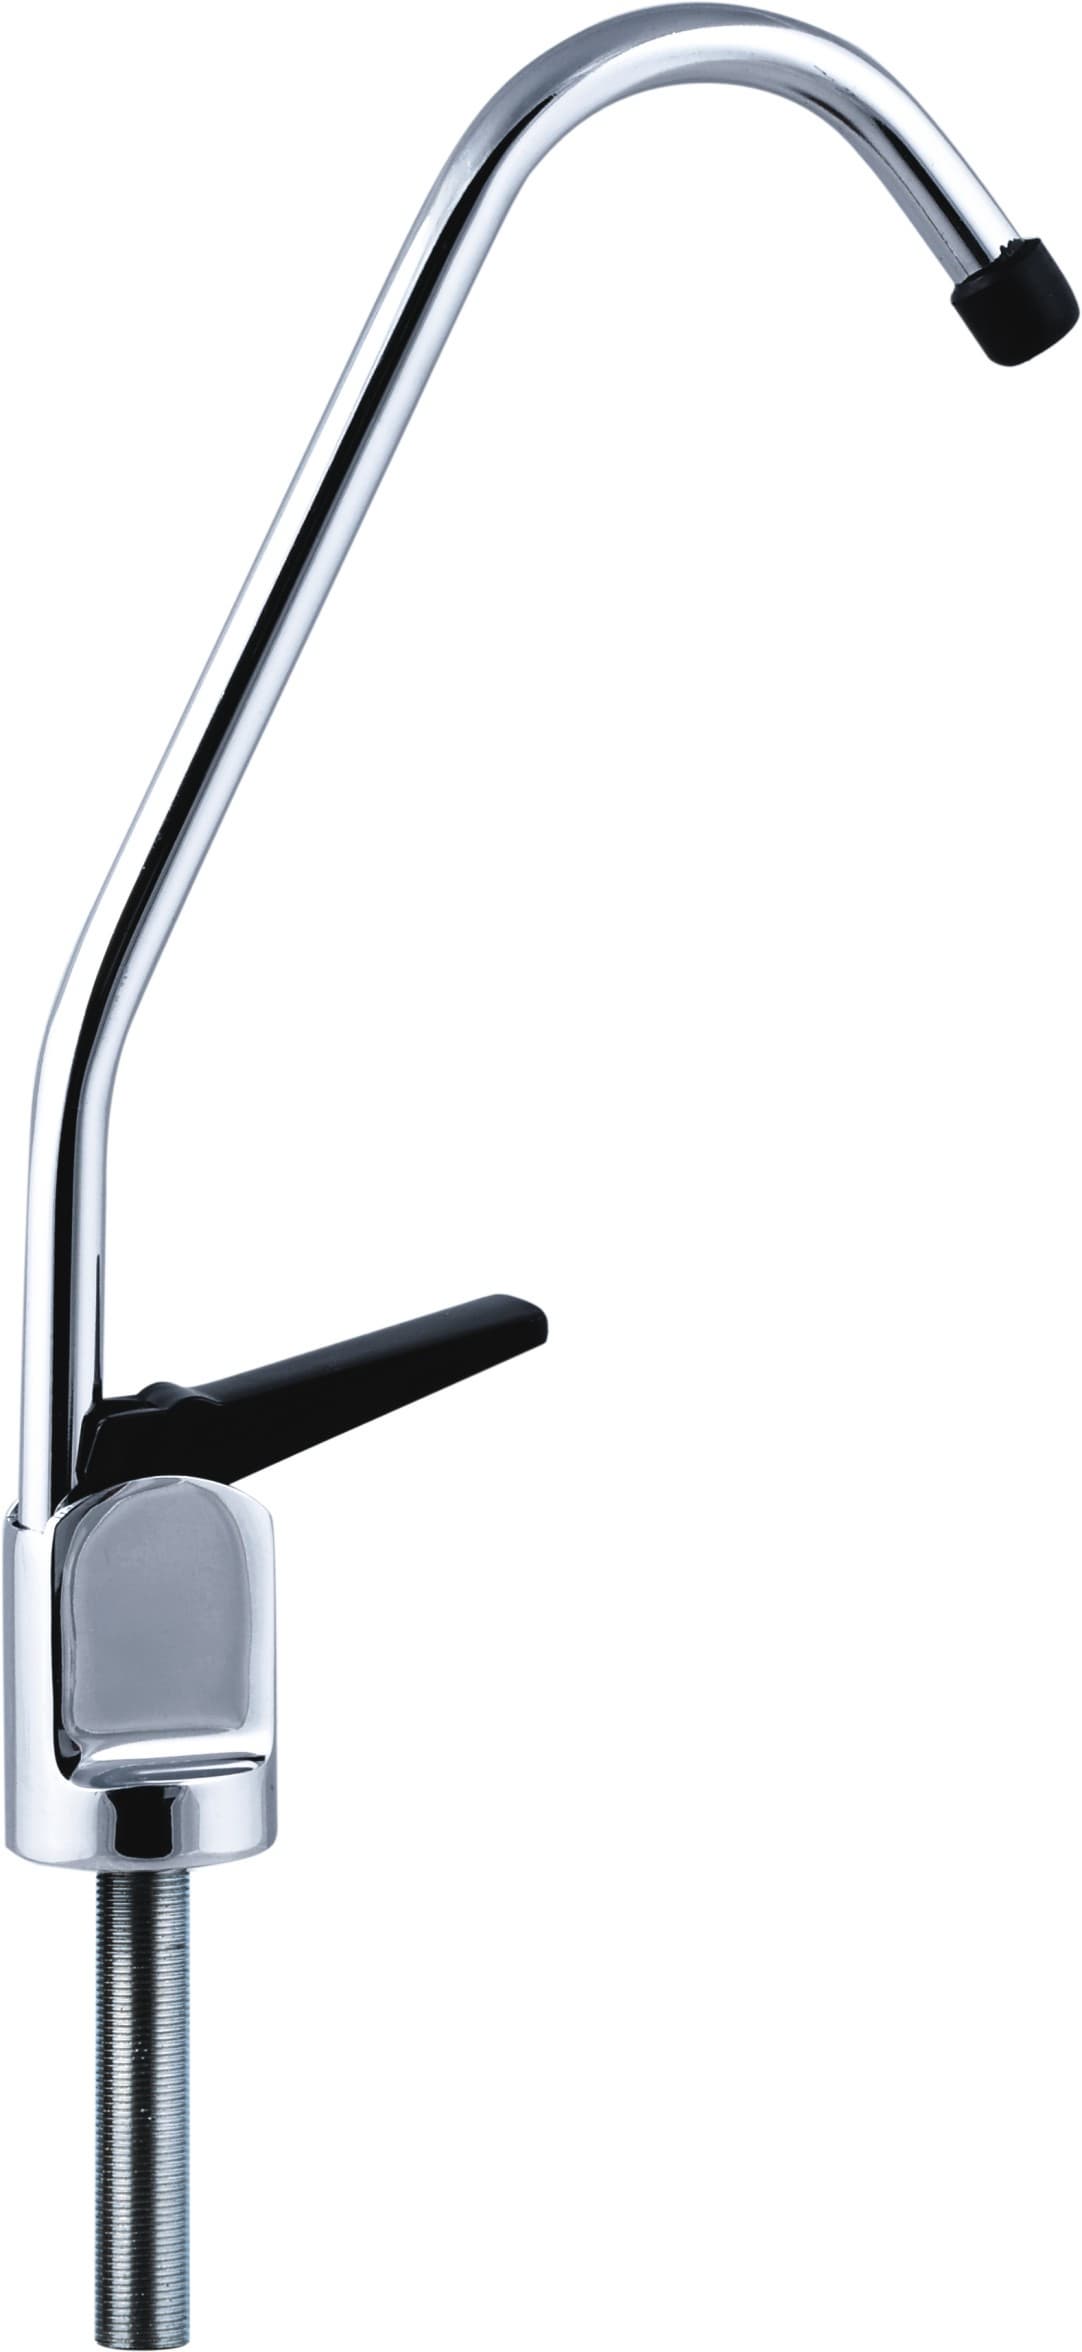 Oridinary goose neck kitchen faucets